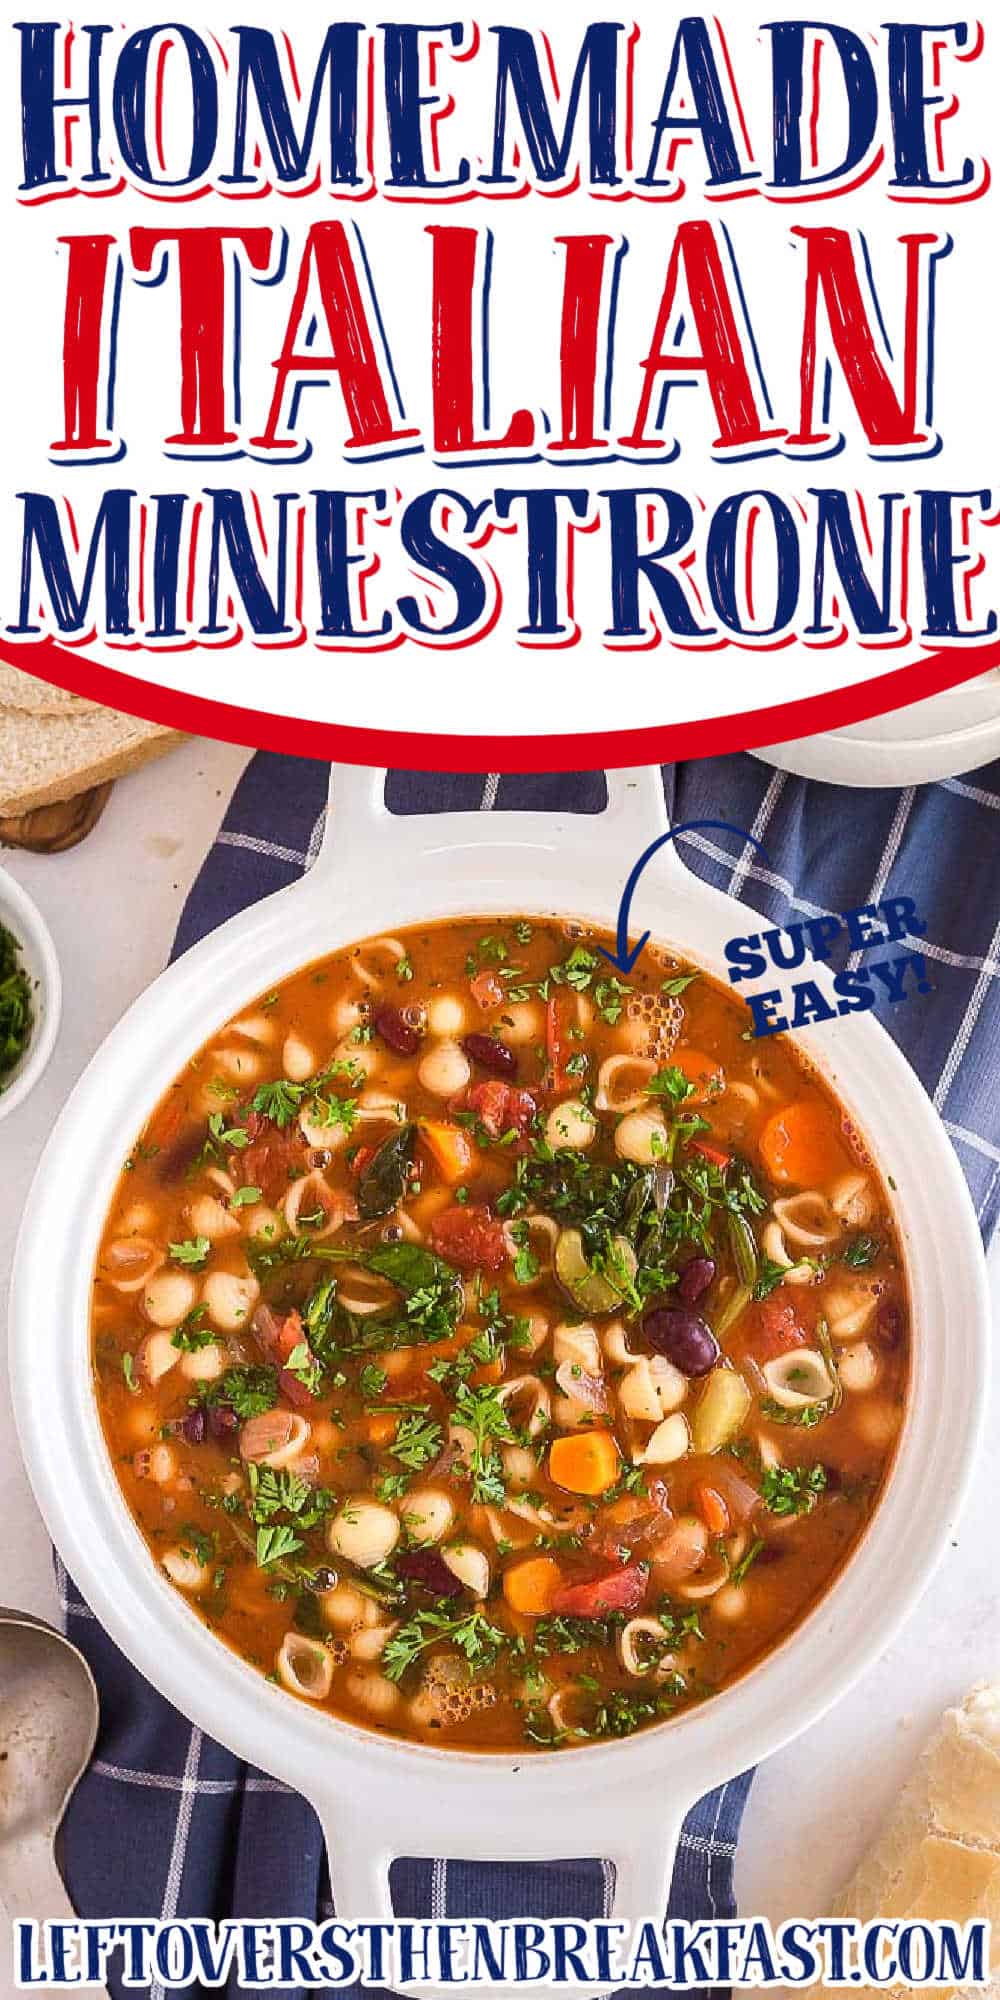 soup with text "homemade Italian minestrone soup"